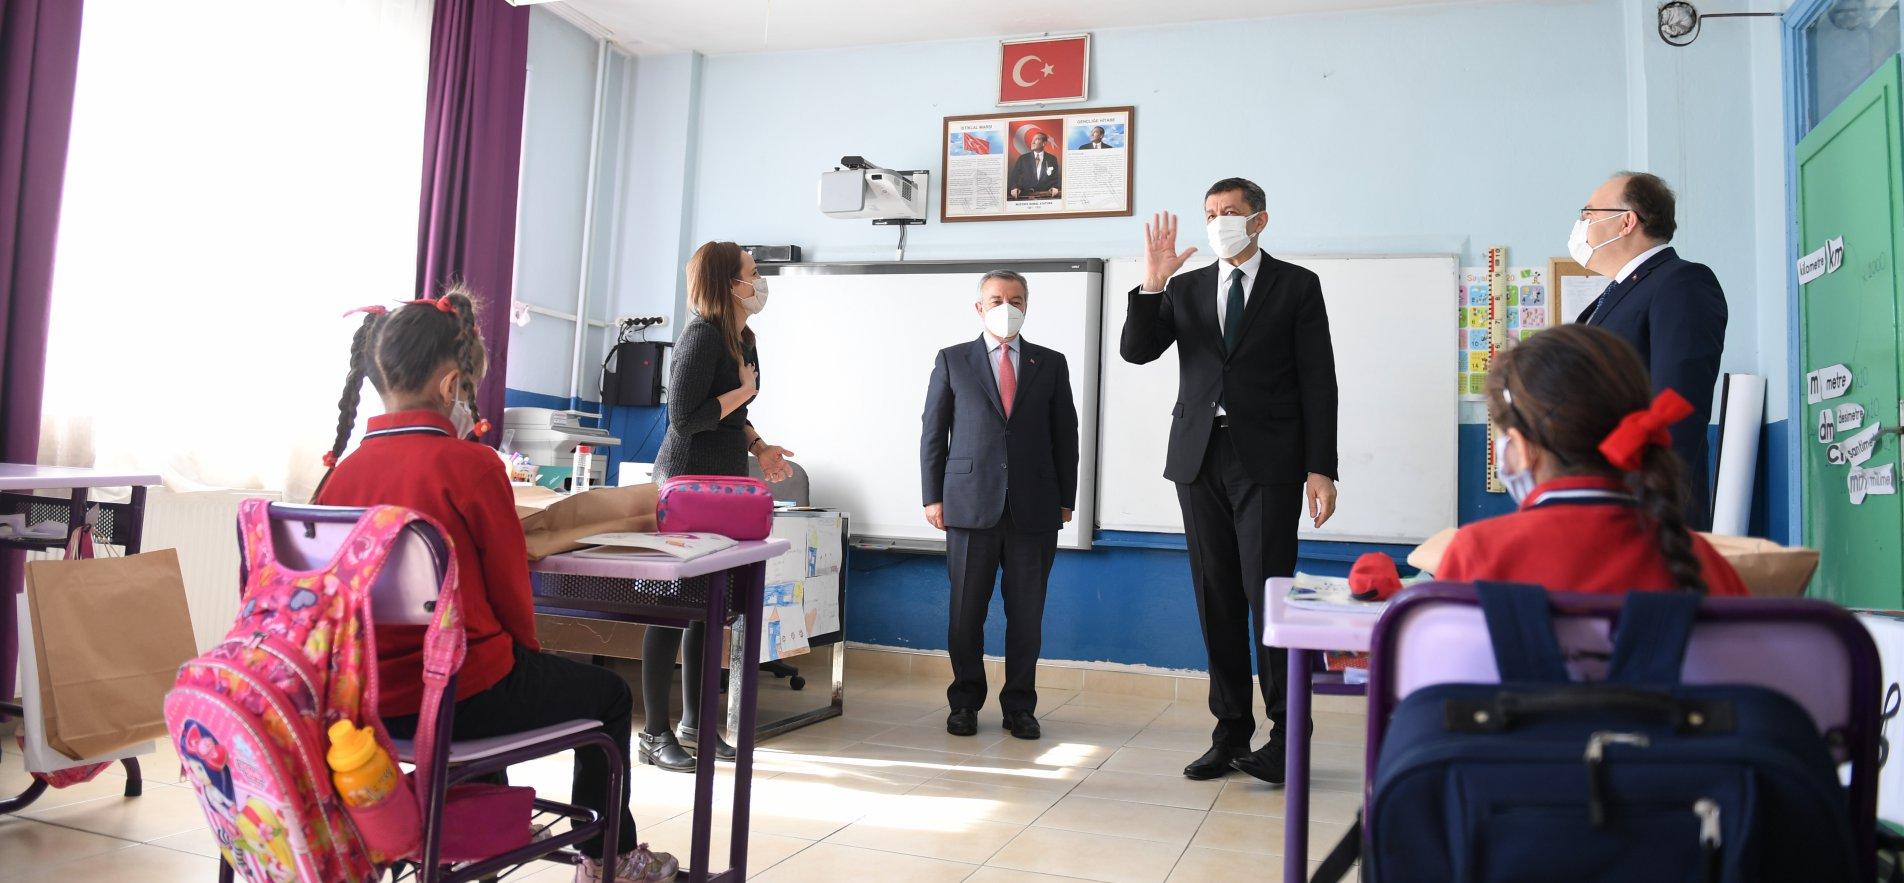 MINISTER SELÇUK COMMENTS ABOUT EDUCATION IN THE FIRST YEAR OF THE PANDEMIC